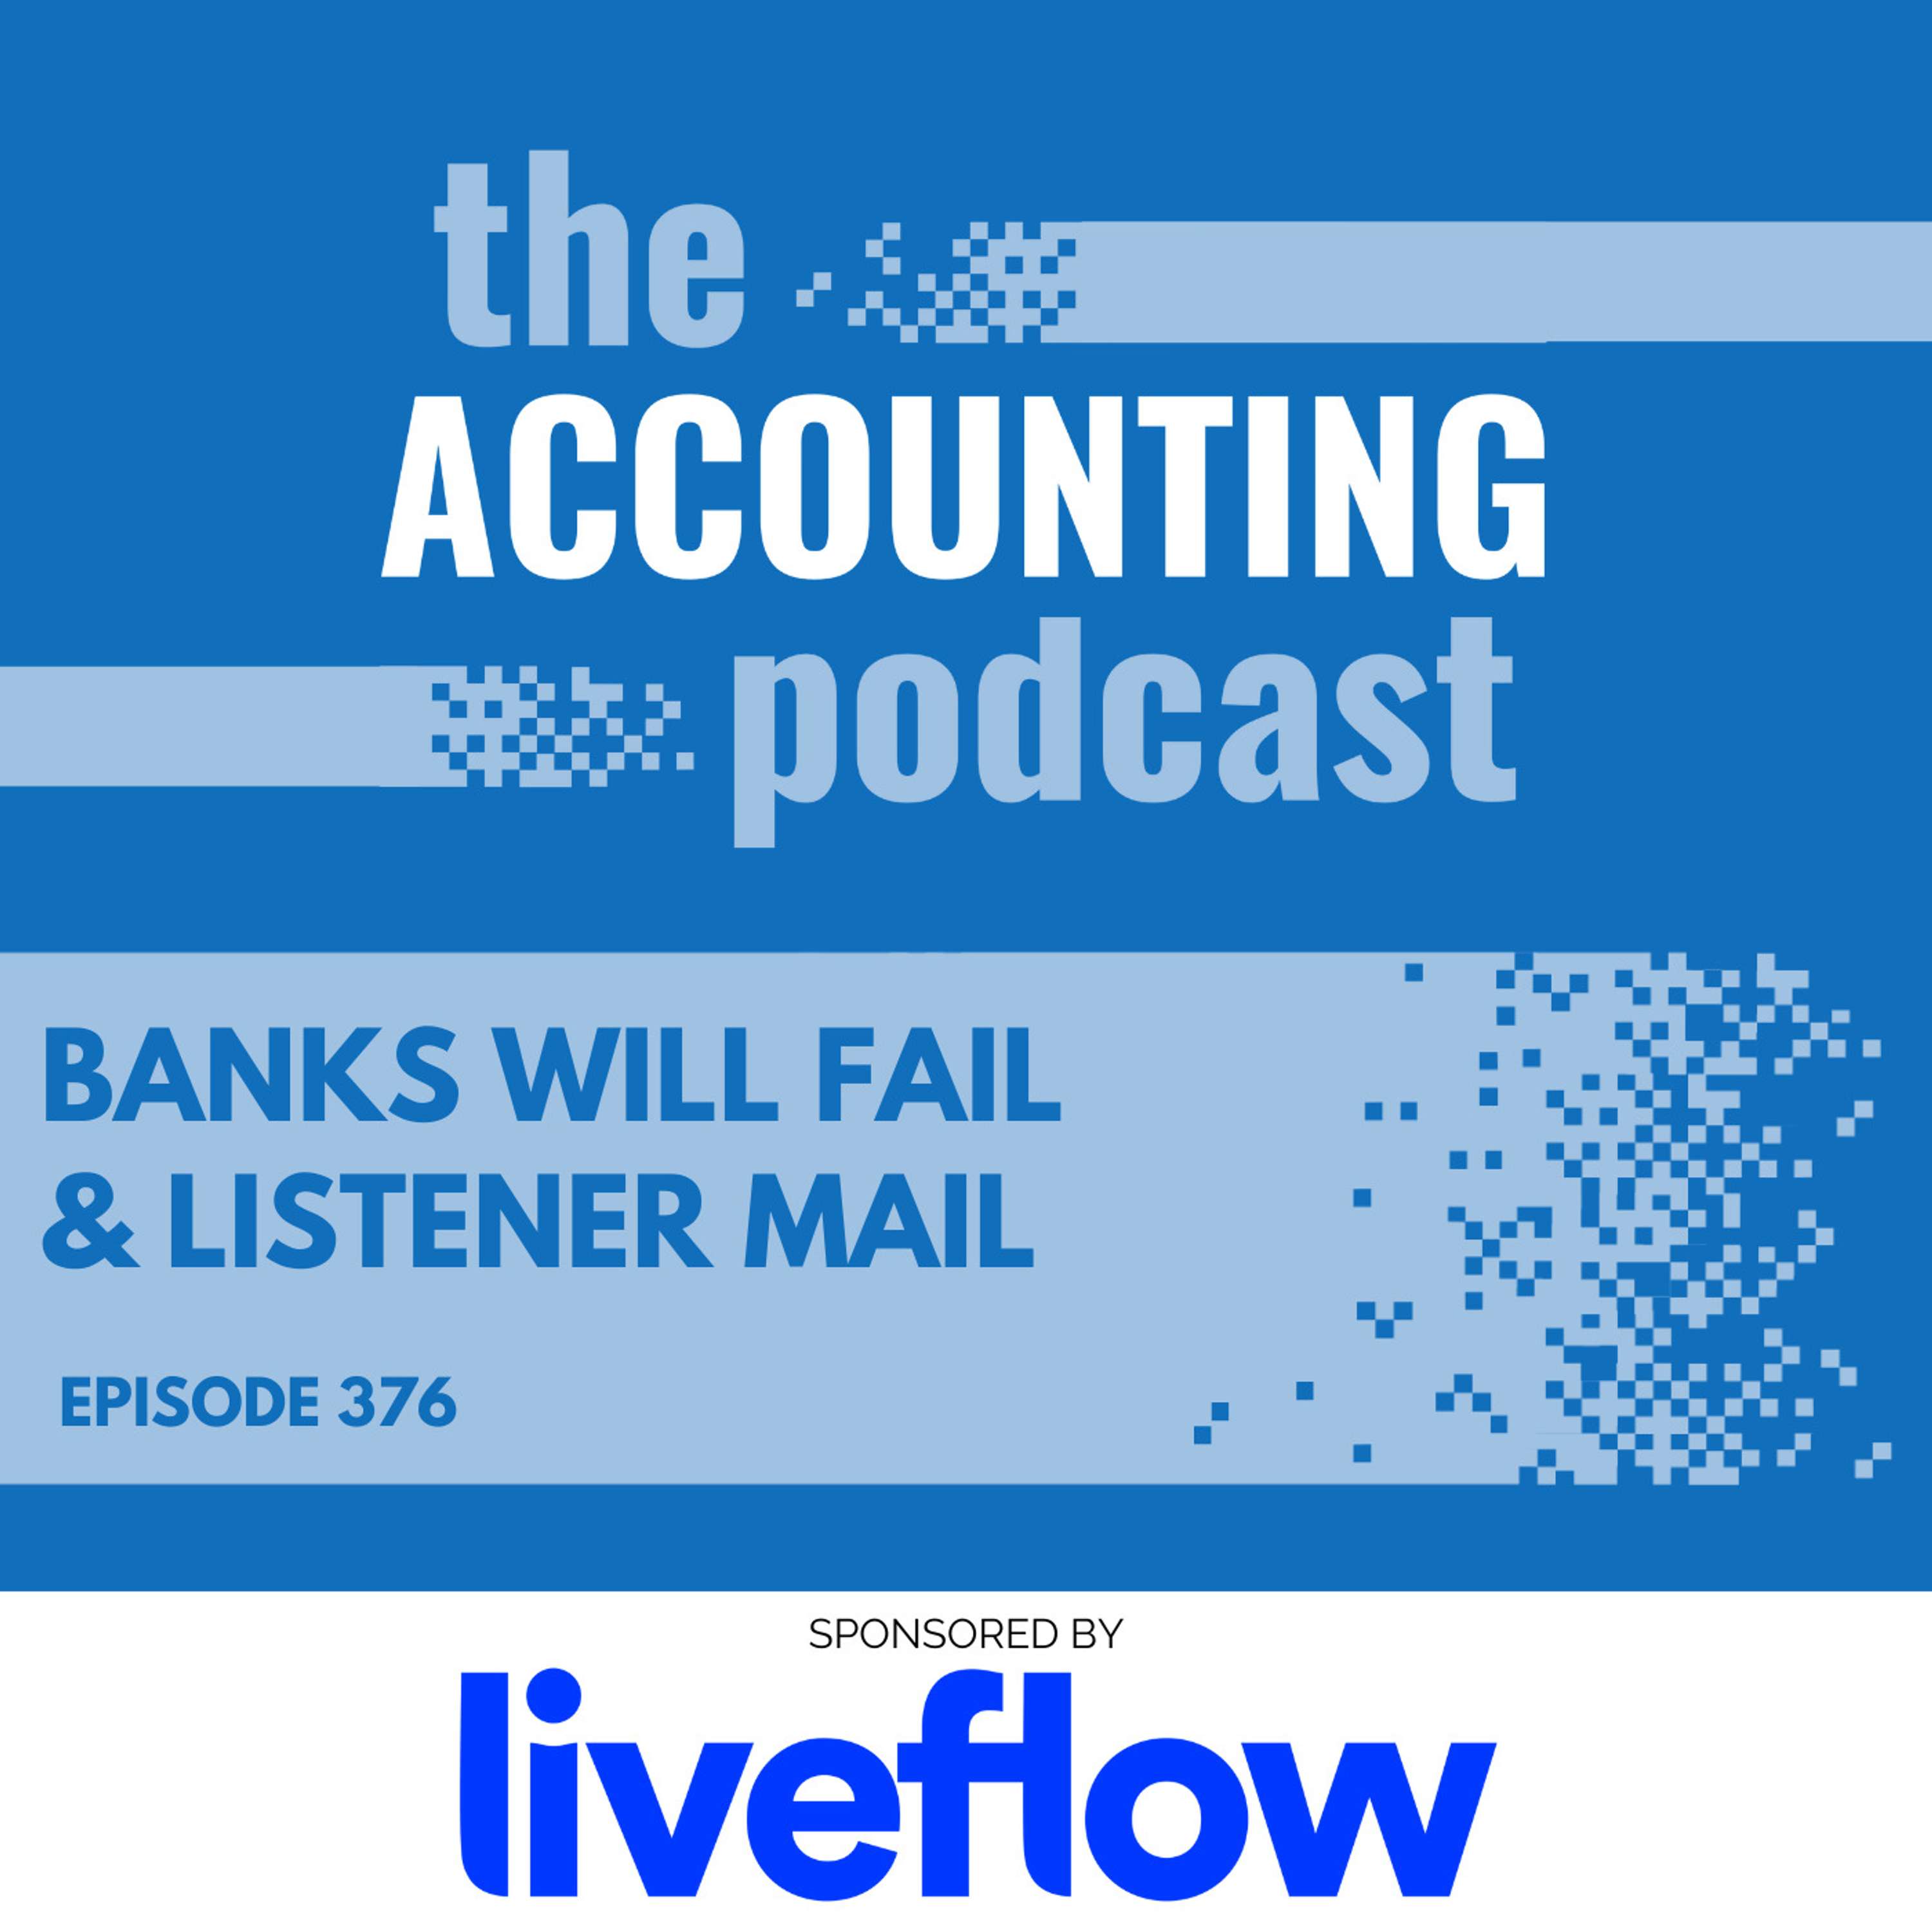 Banks Will Fail & Listener Mail